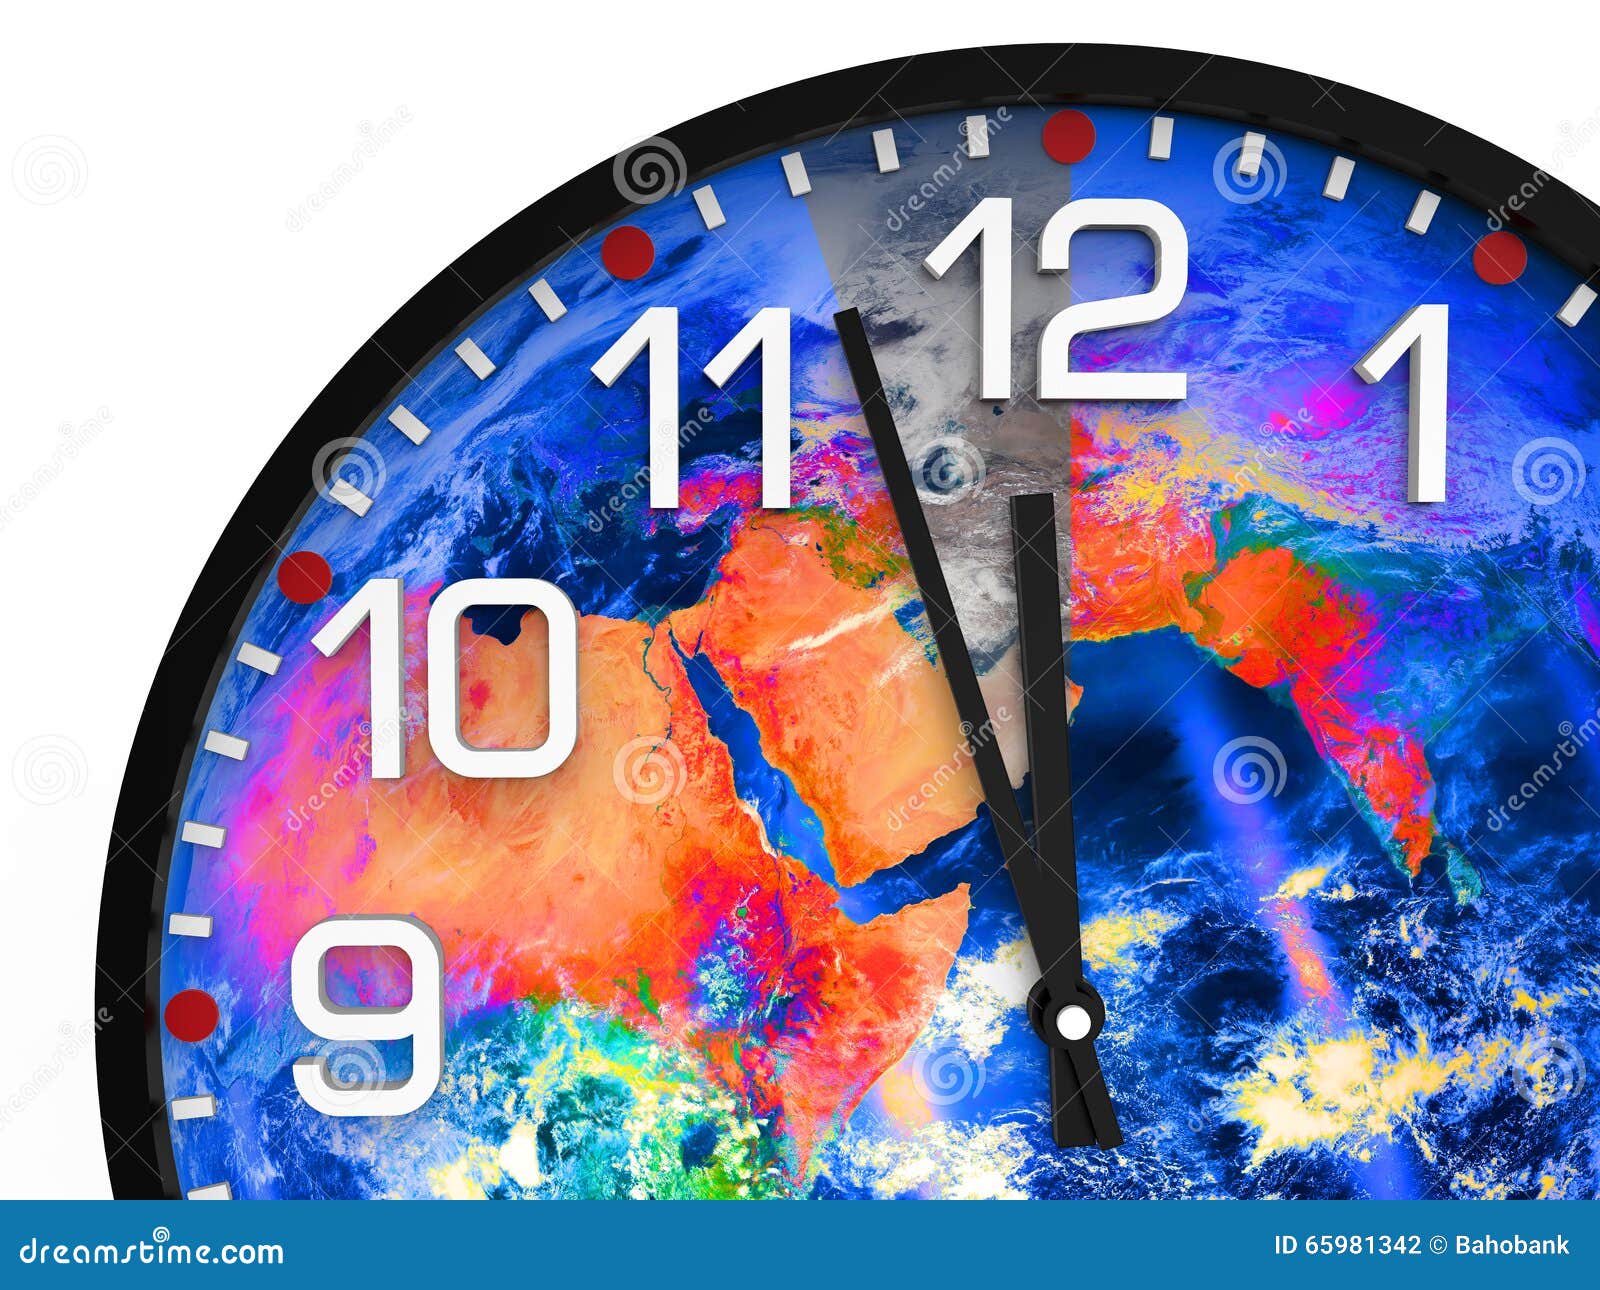 World time doomsday 23.57 hrs / Elements of this image furnished by NASA. World time doomsday 23.57 hrs., Just three minutes End of the World. Elements of this image furnished by NASA